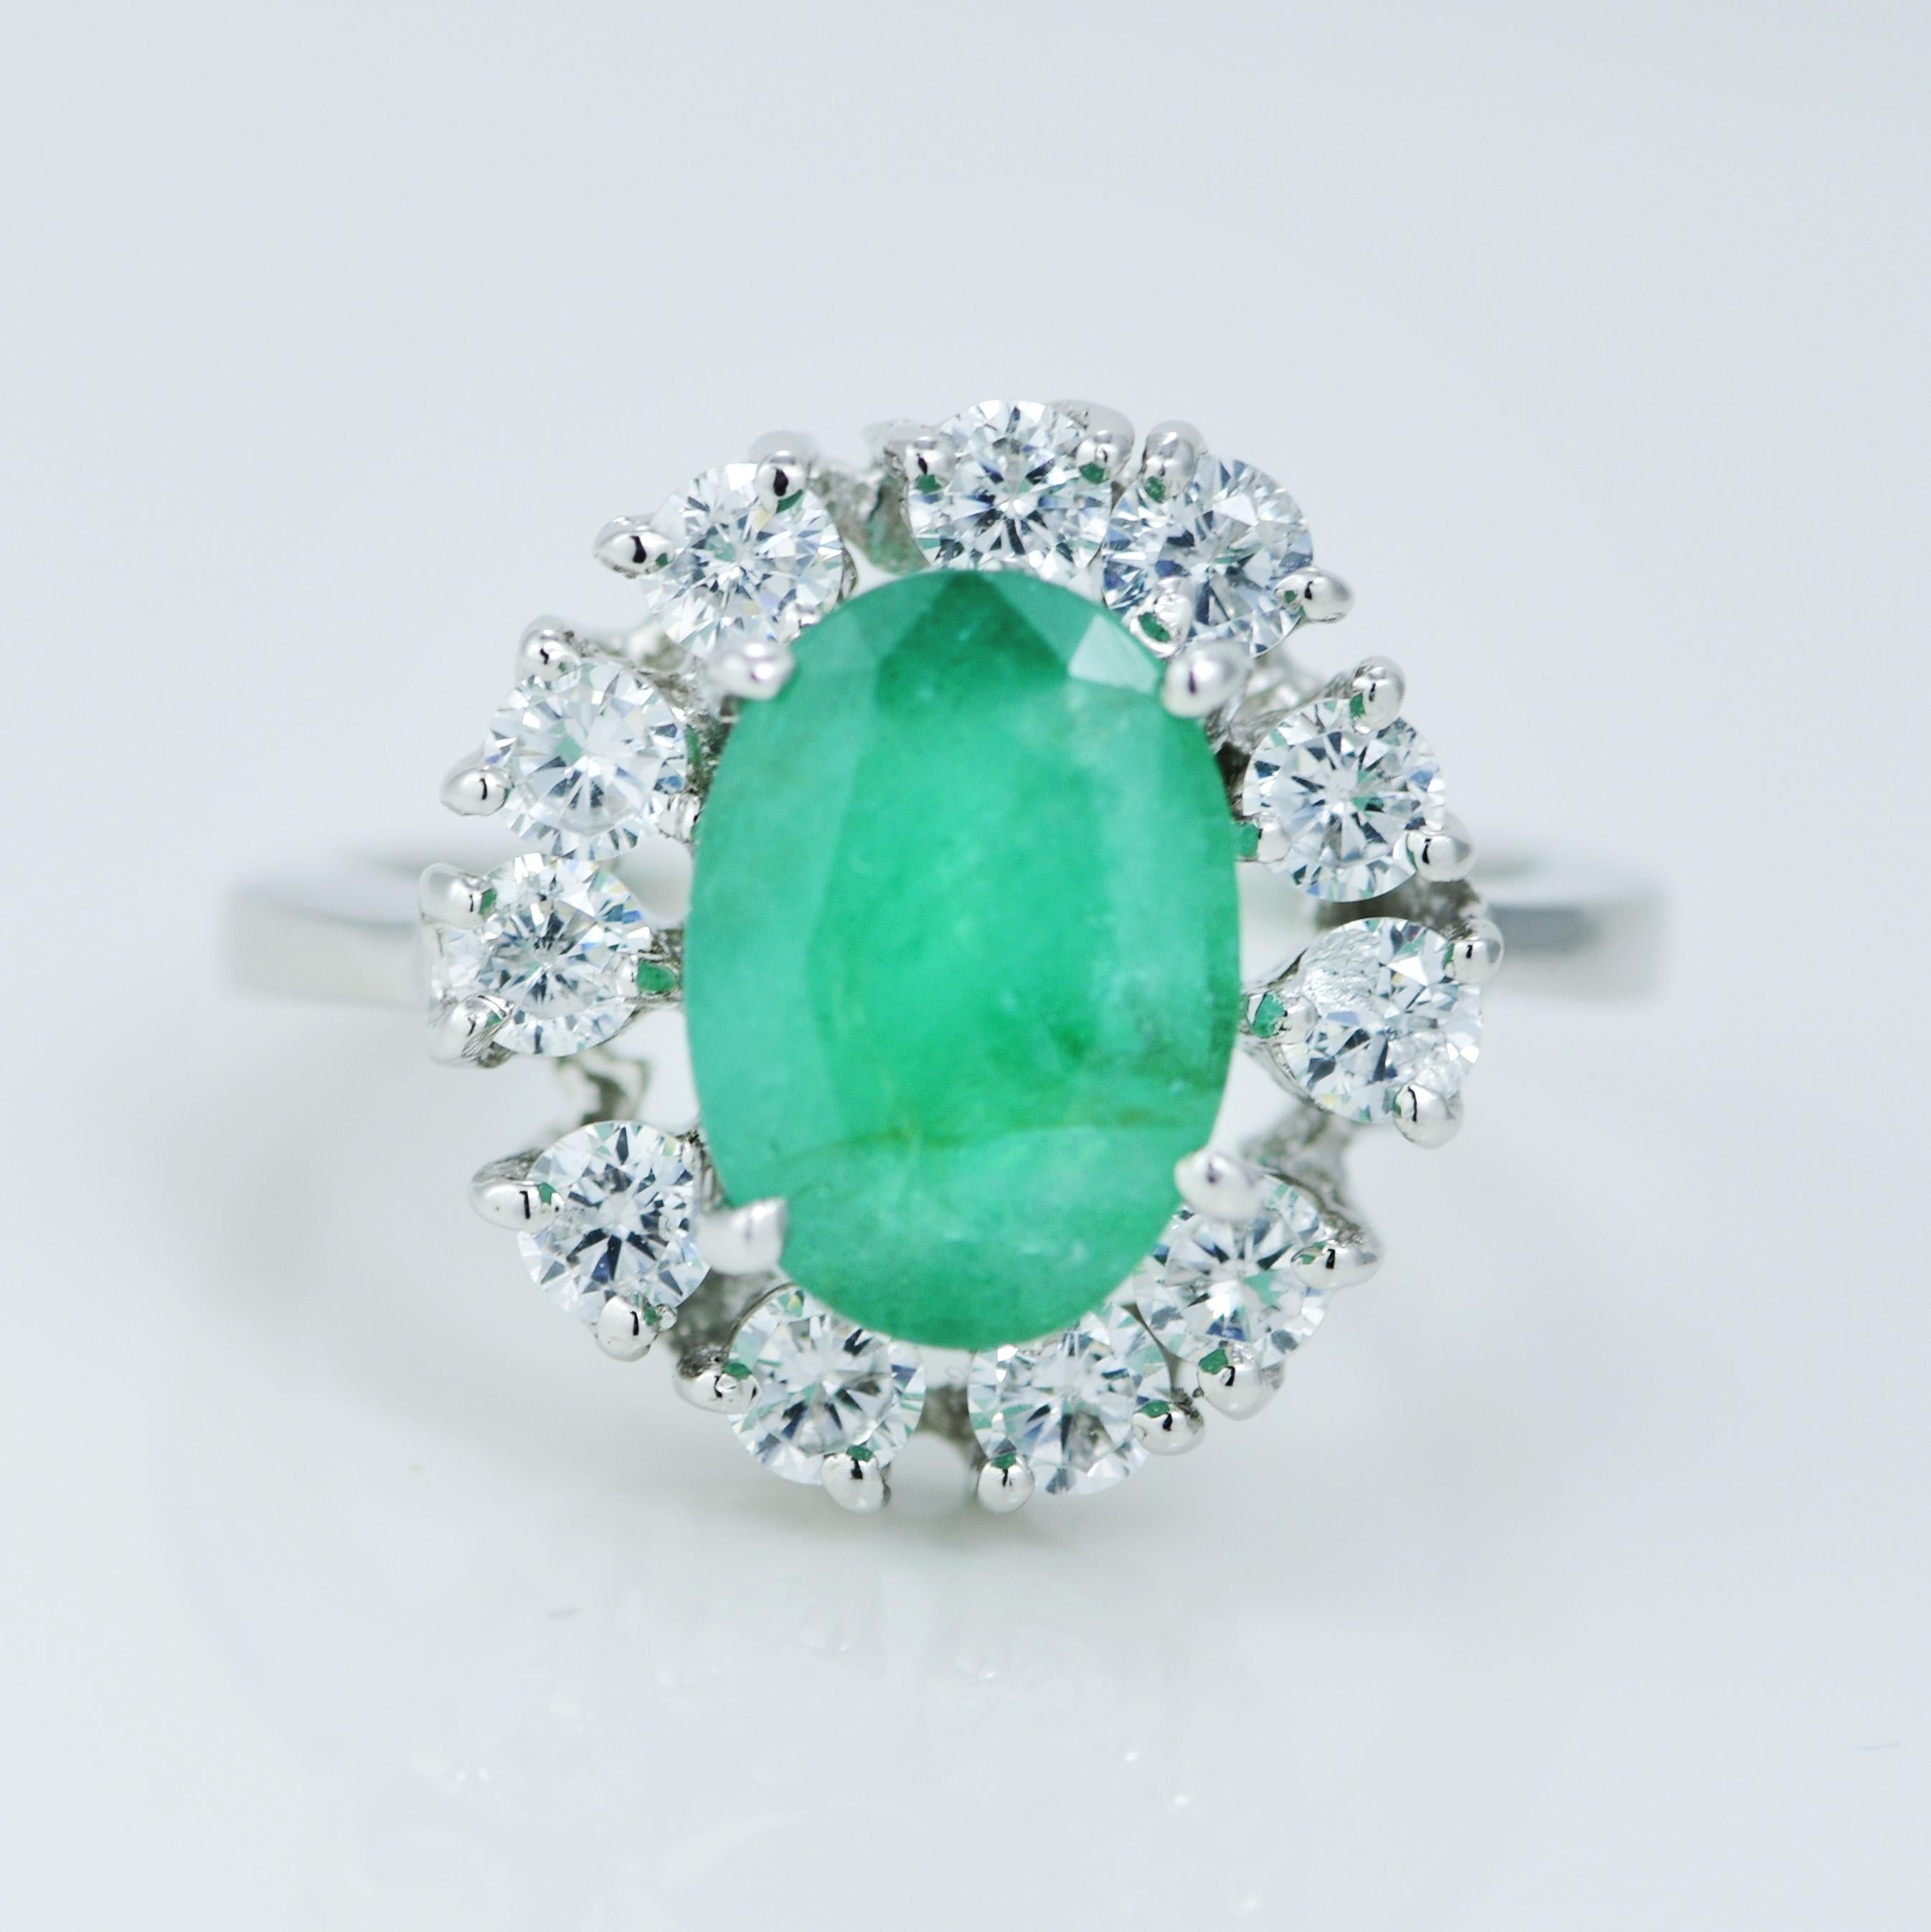 A beautifully designed Natural Emerald silver ring, 

Specifications 

Ring metal - 925 Silver
Ring Size - 6 US

Centre stone type - Natural Green Emerald
Centre stone size - 9.6 X 7.2 mm (Approx.)
Centre stone weight - 2.15 ct (Approx)
Centre stone